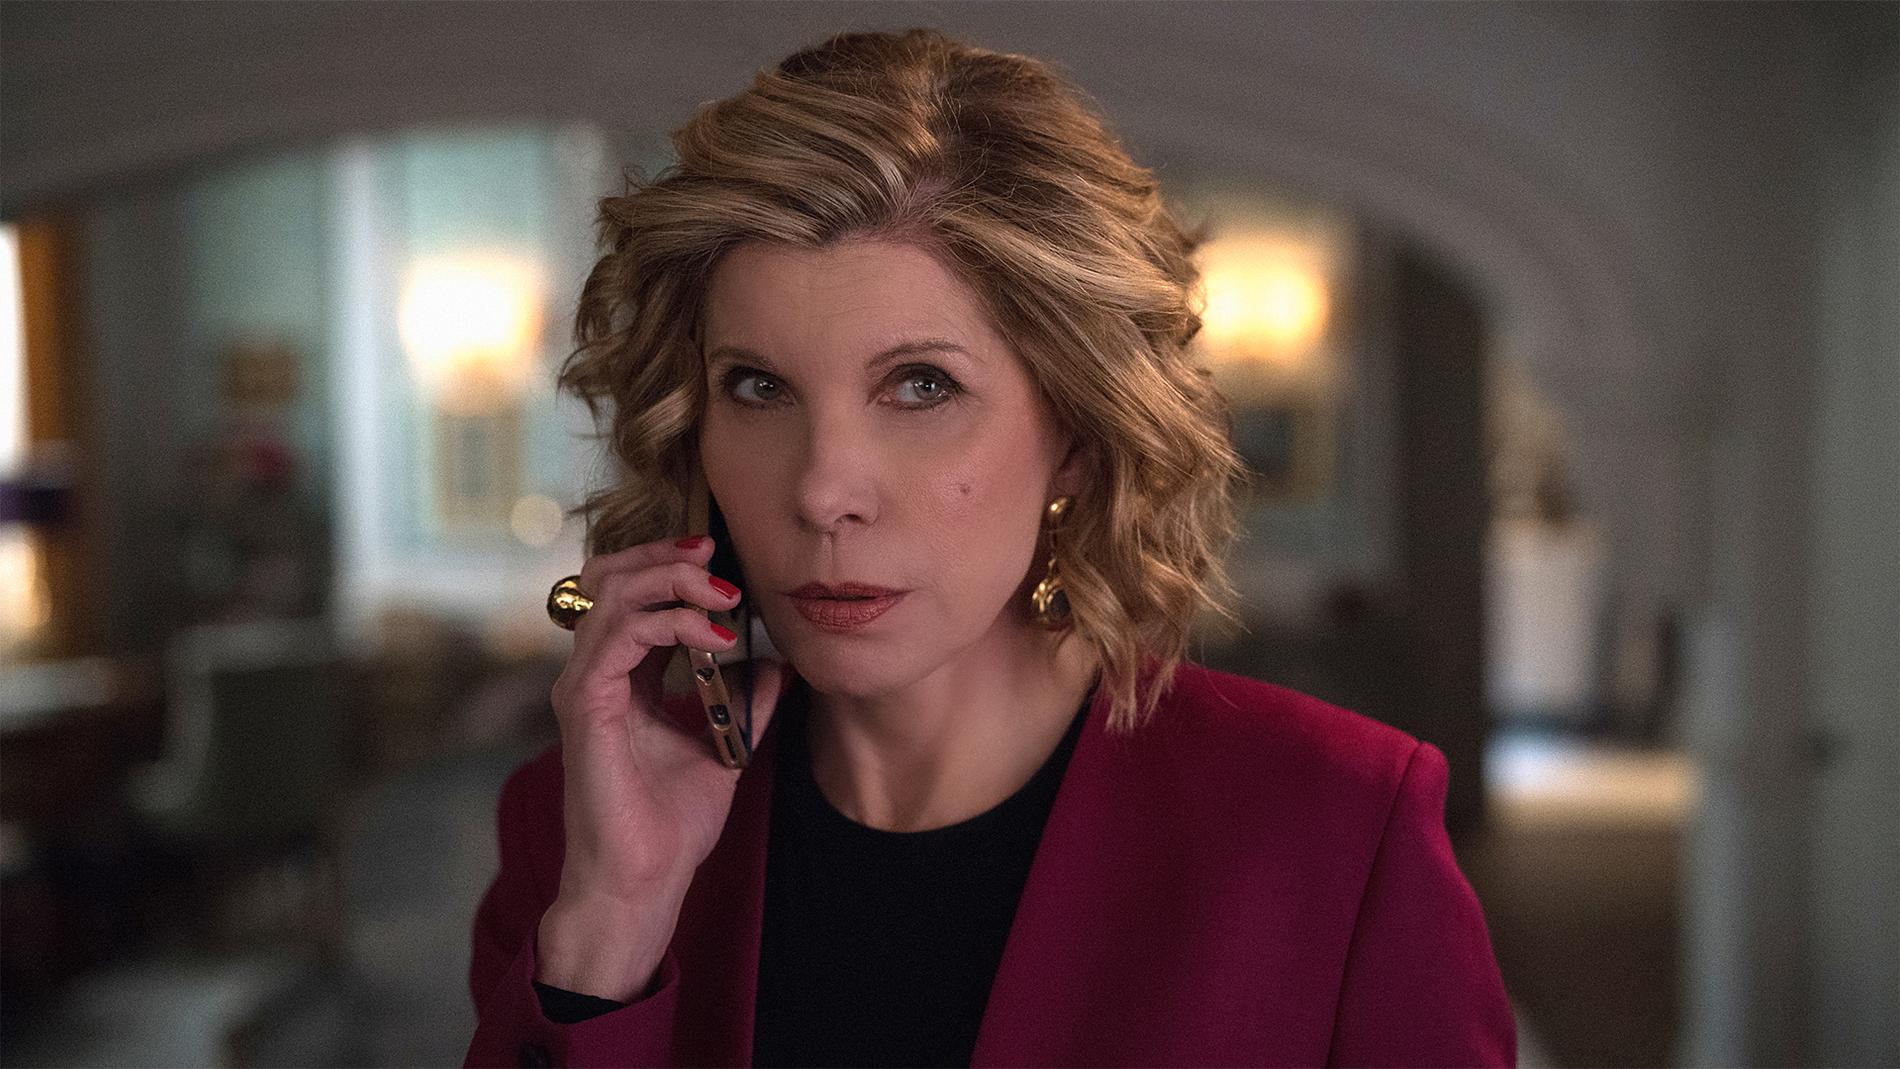 ”The good fight”.